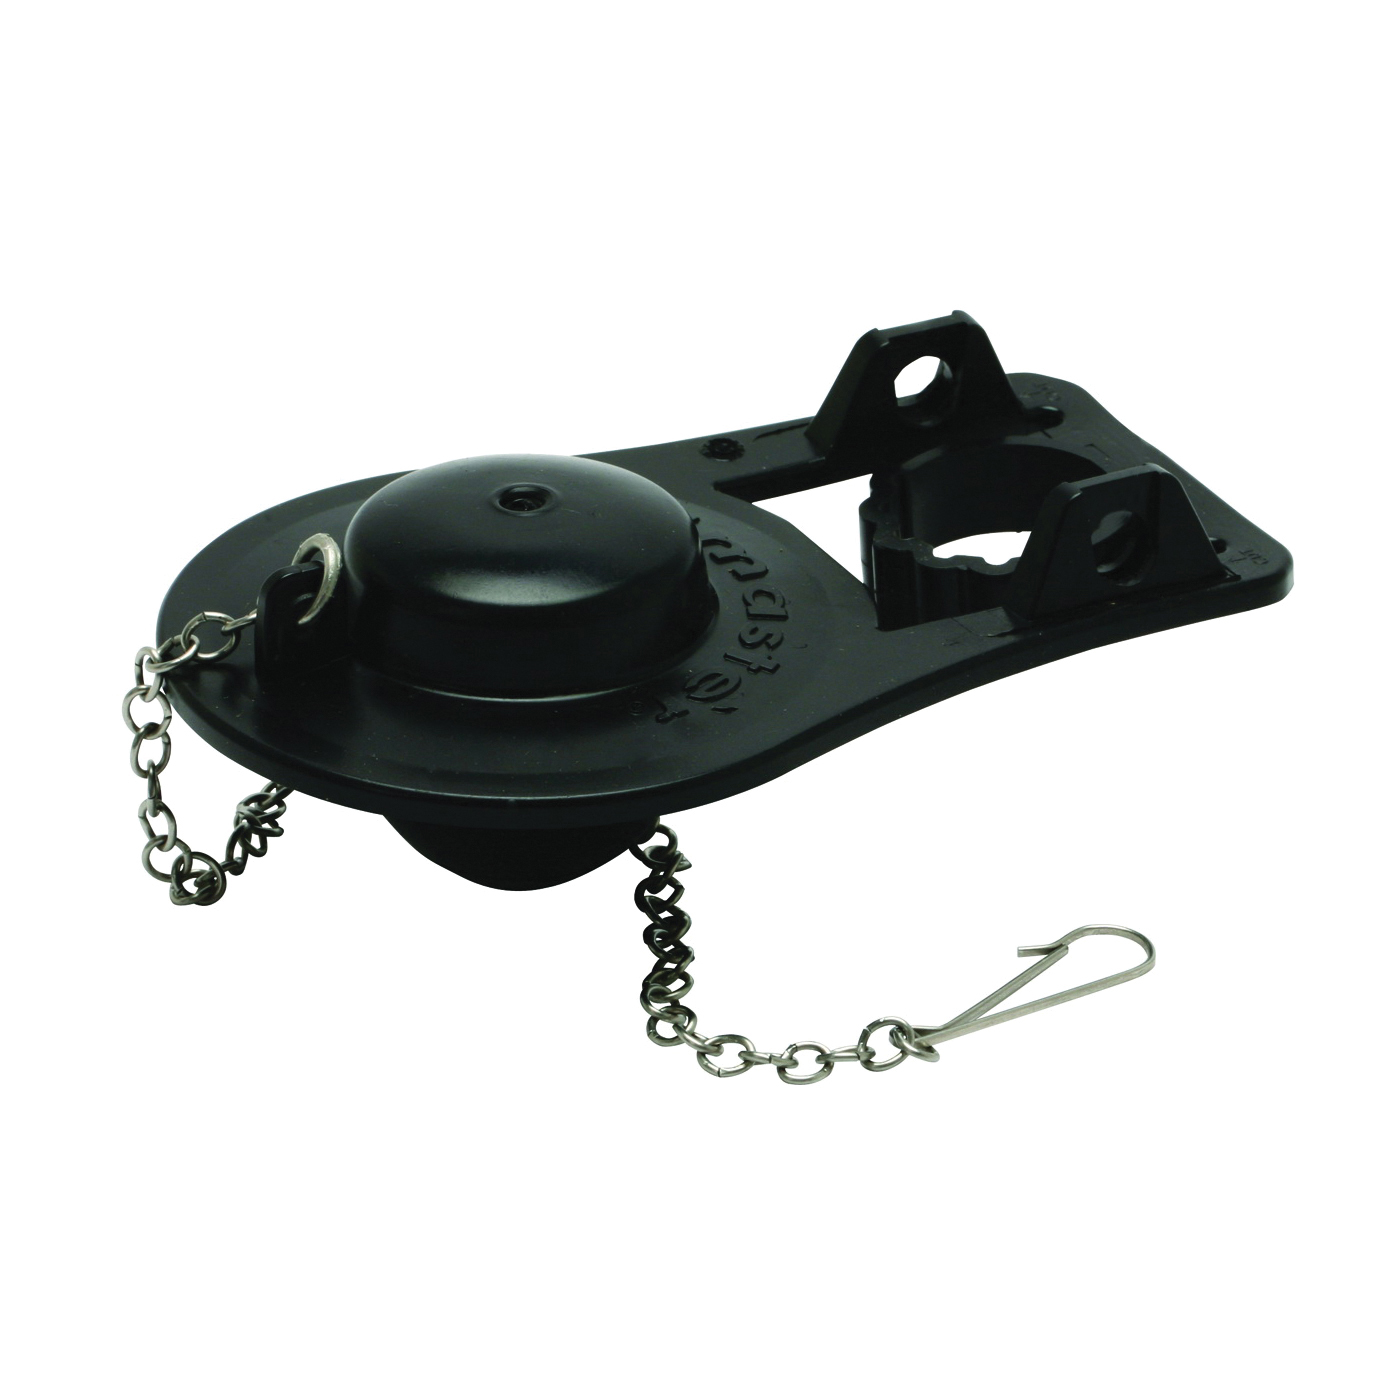 503 Toilet Flapper, Black, For: 2 in Flush Valves with or without Mount Ears, 3.5 gpf or Larger